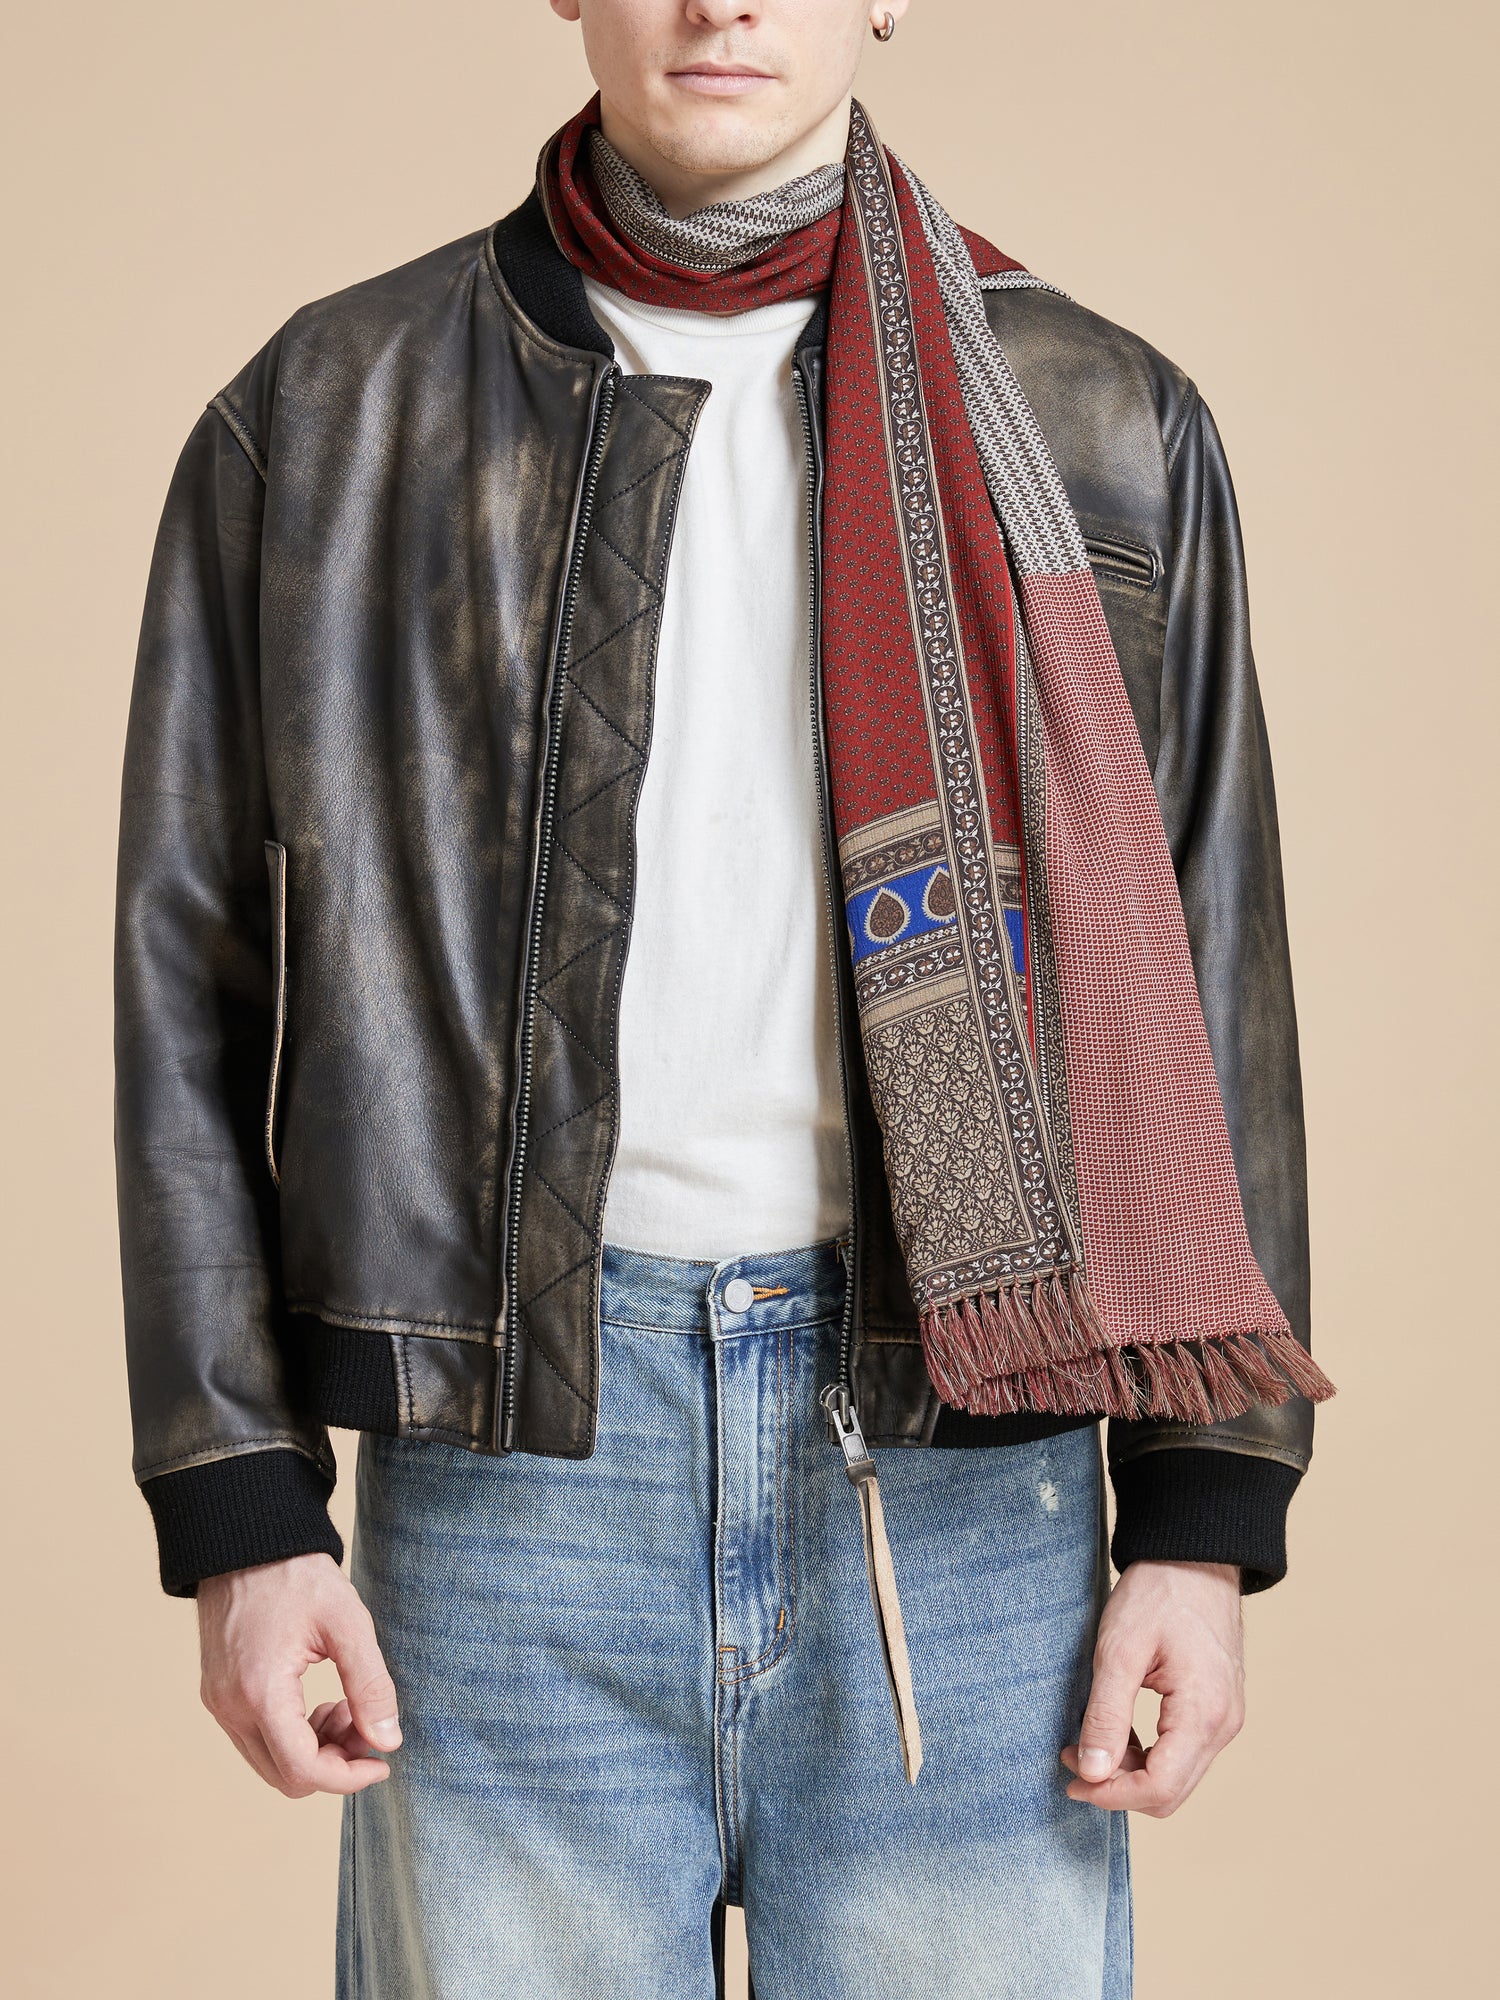 A man in jeans and a leather jacket wearing a Found Paisley Medley Scarf.